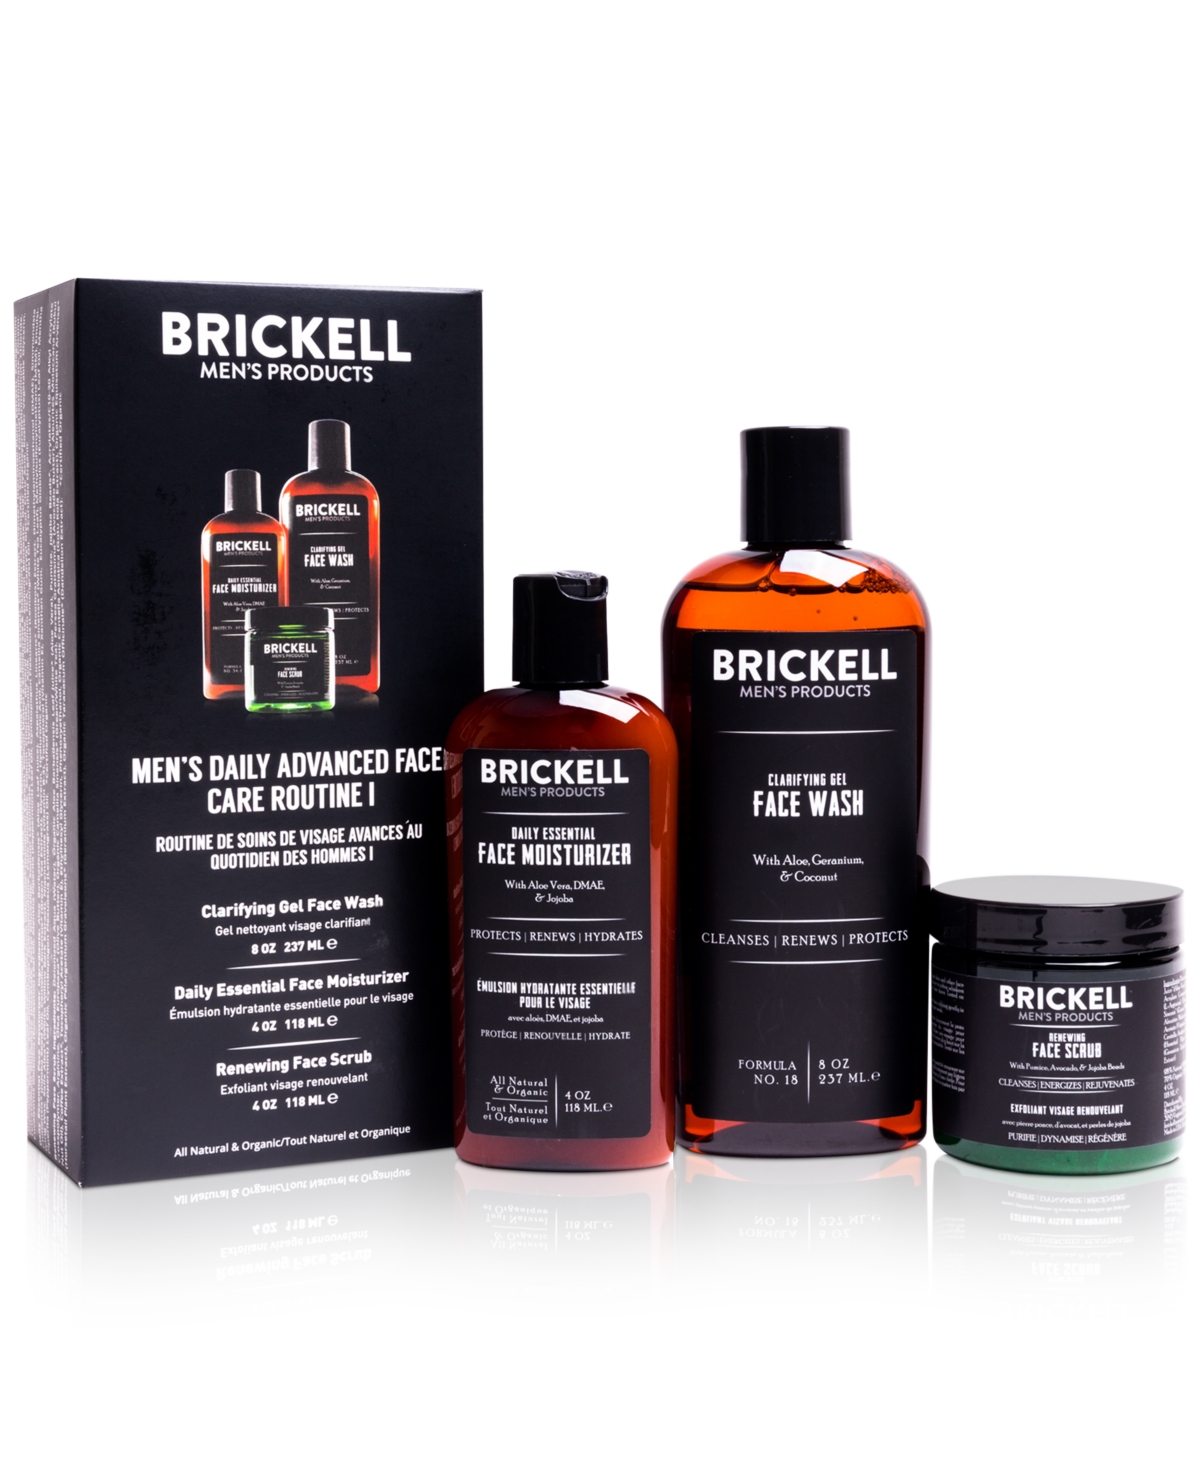 Brickell Men's Products 3-Pc. Men's Daily Advanced Face Care Set - Routine I